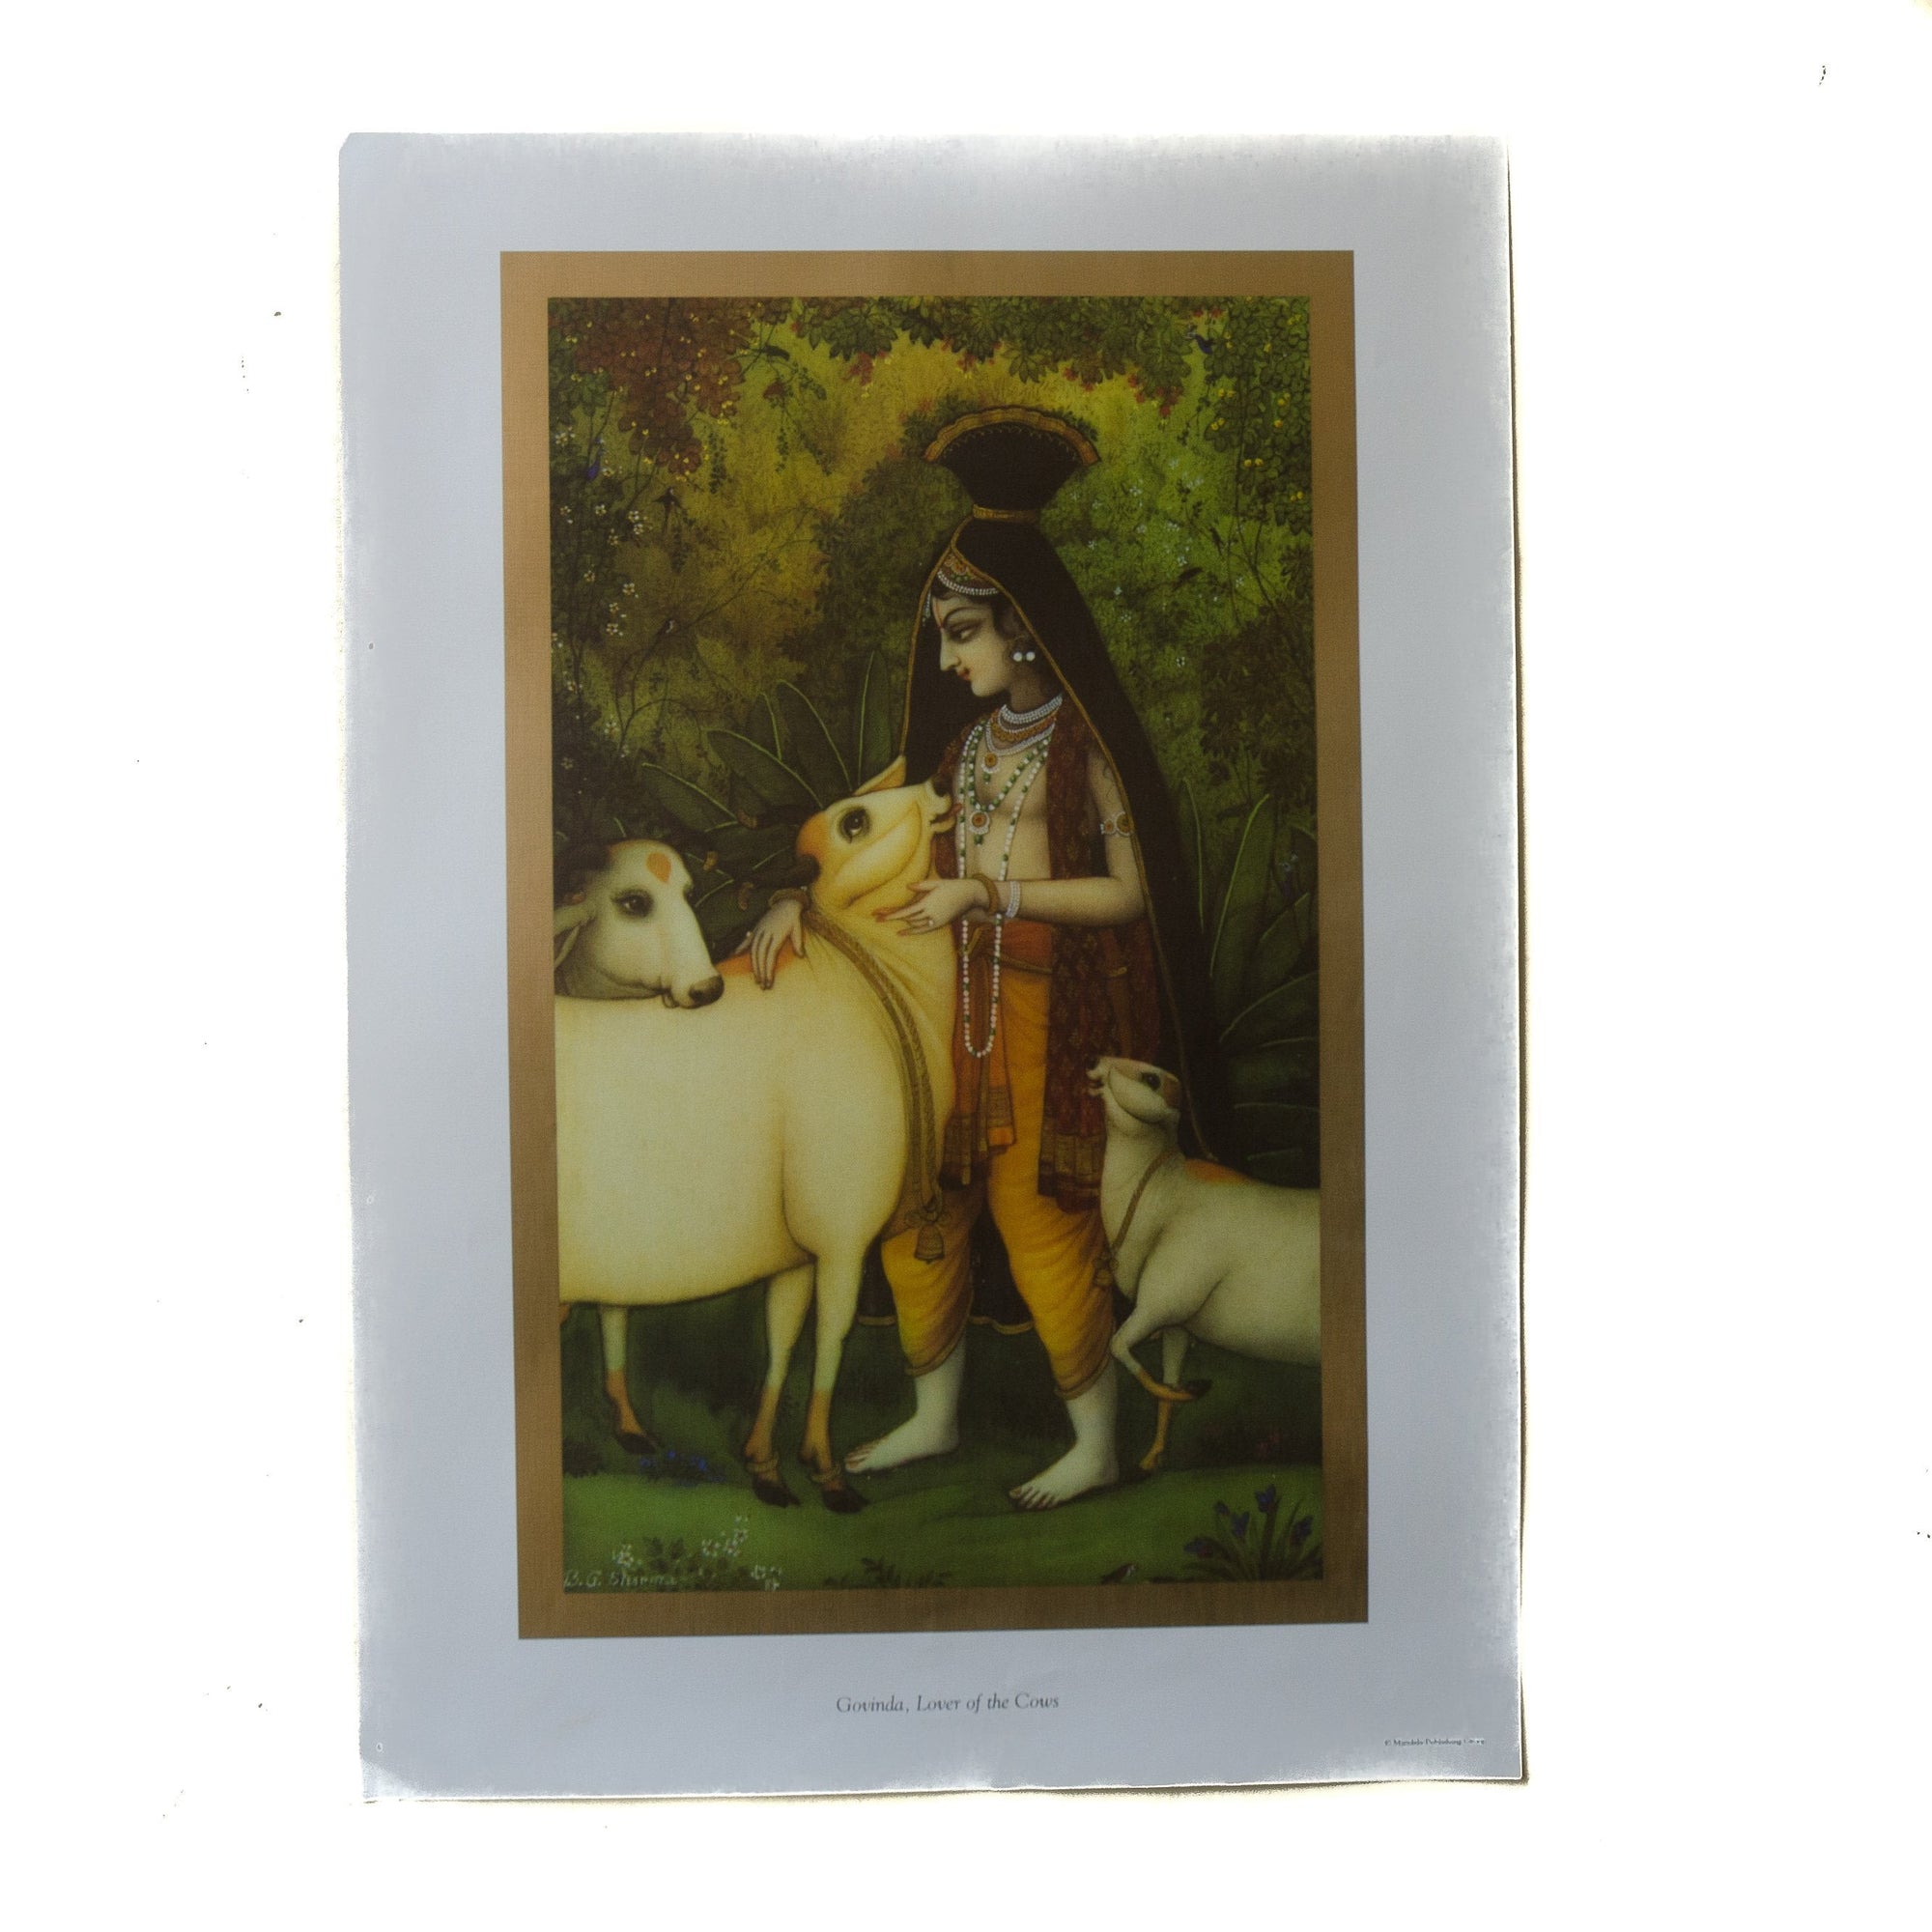  Govinda, Lover of the Cows Poster